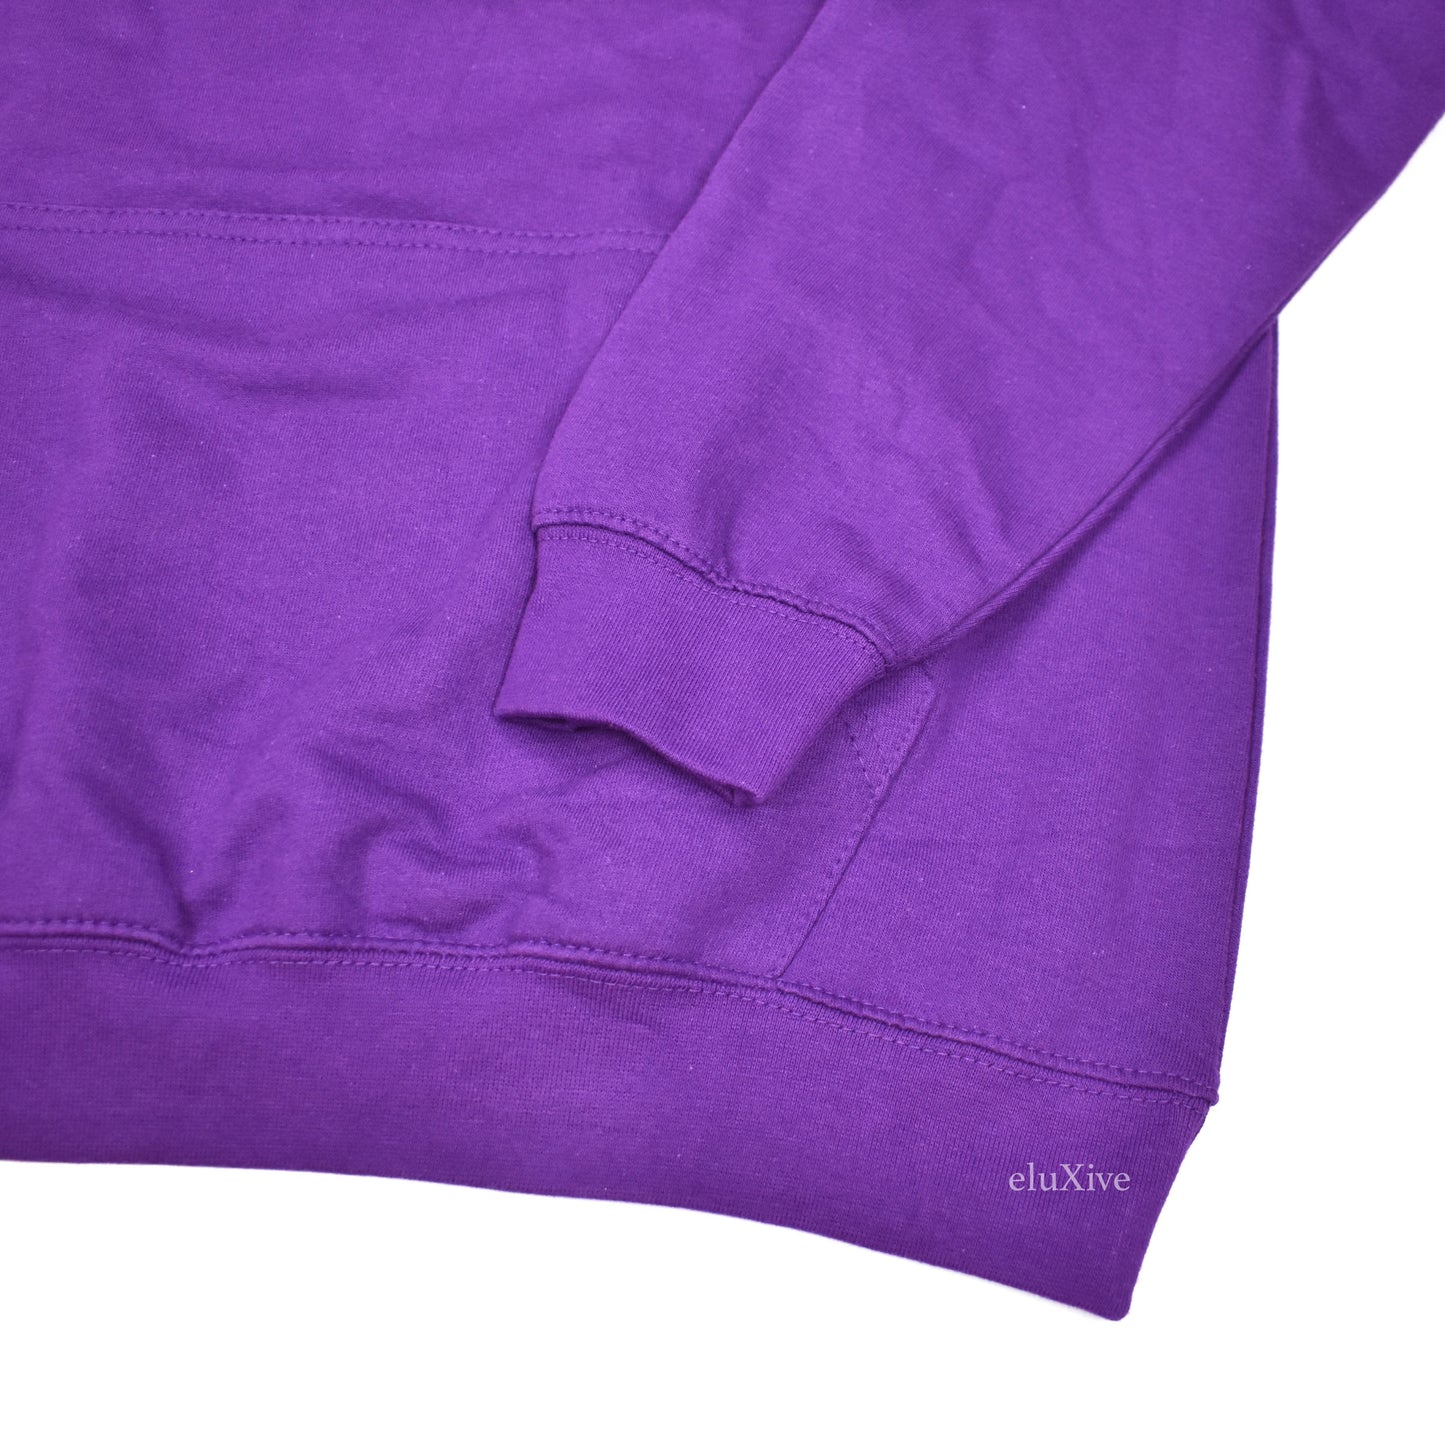 Collection 26 - Purple 'Graduation' Artwork Embroidered Hoodie